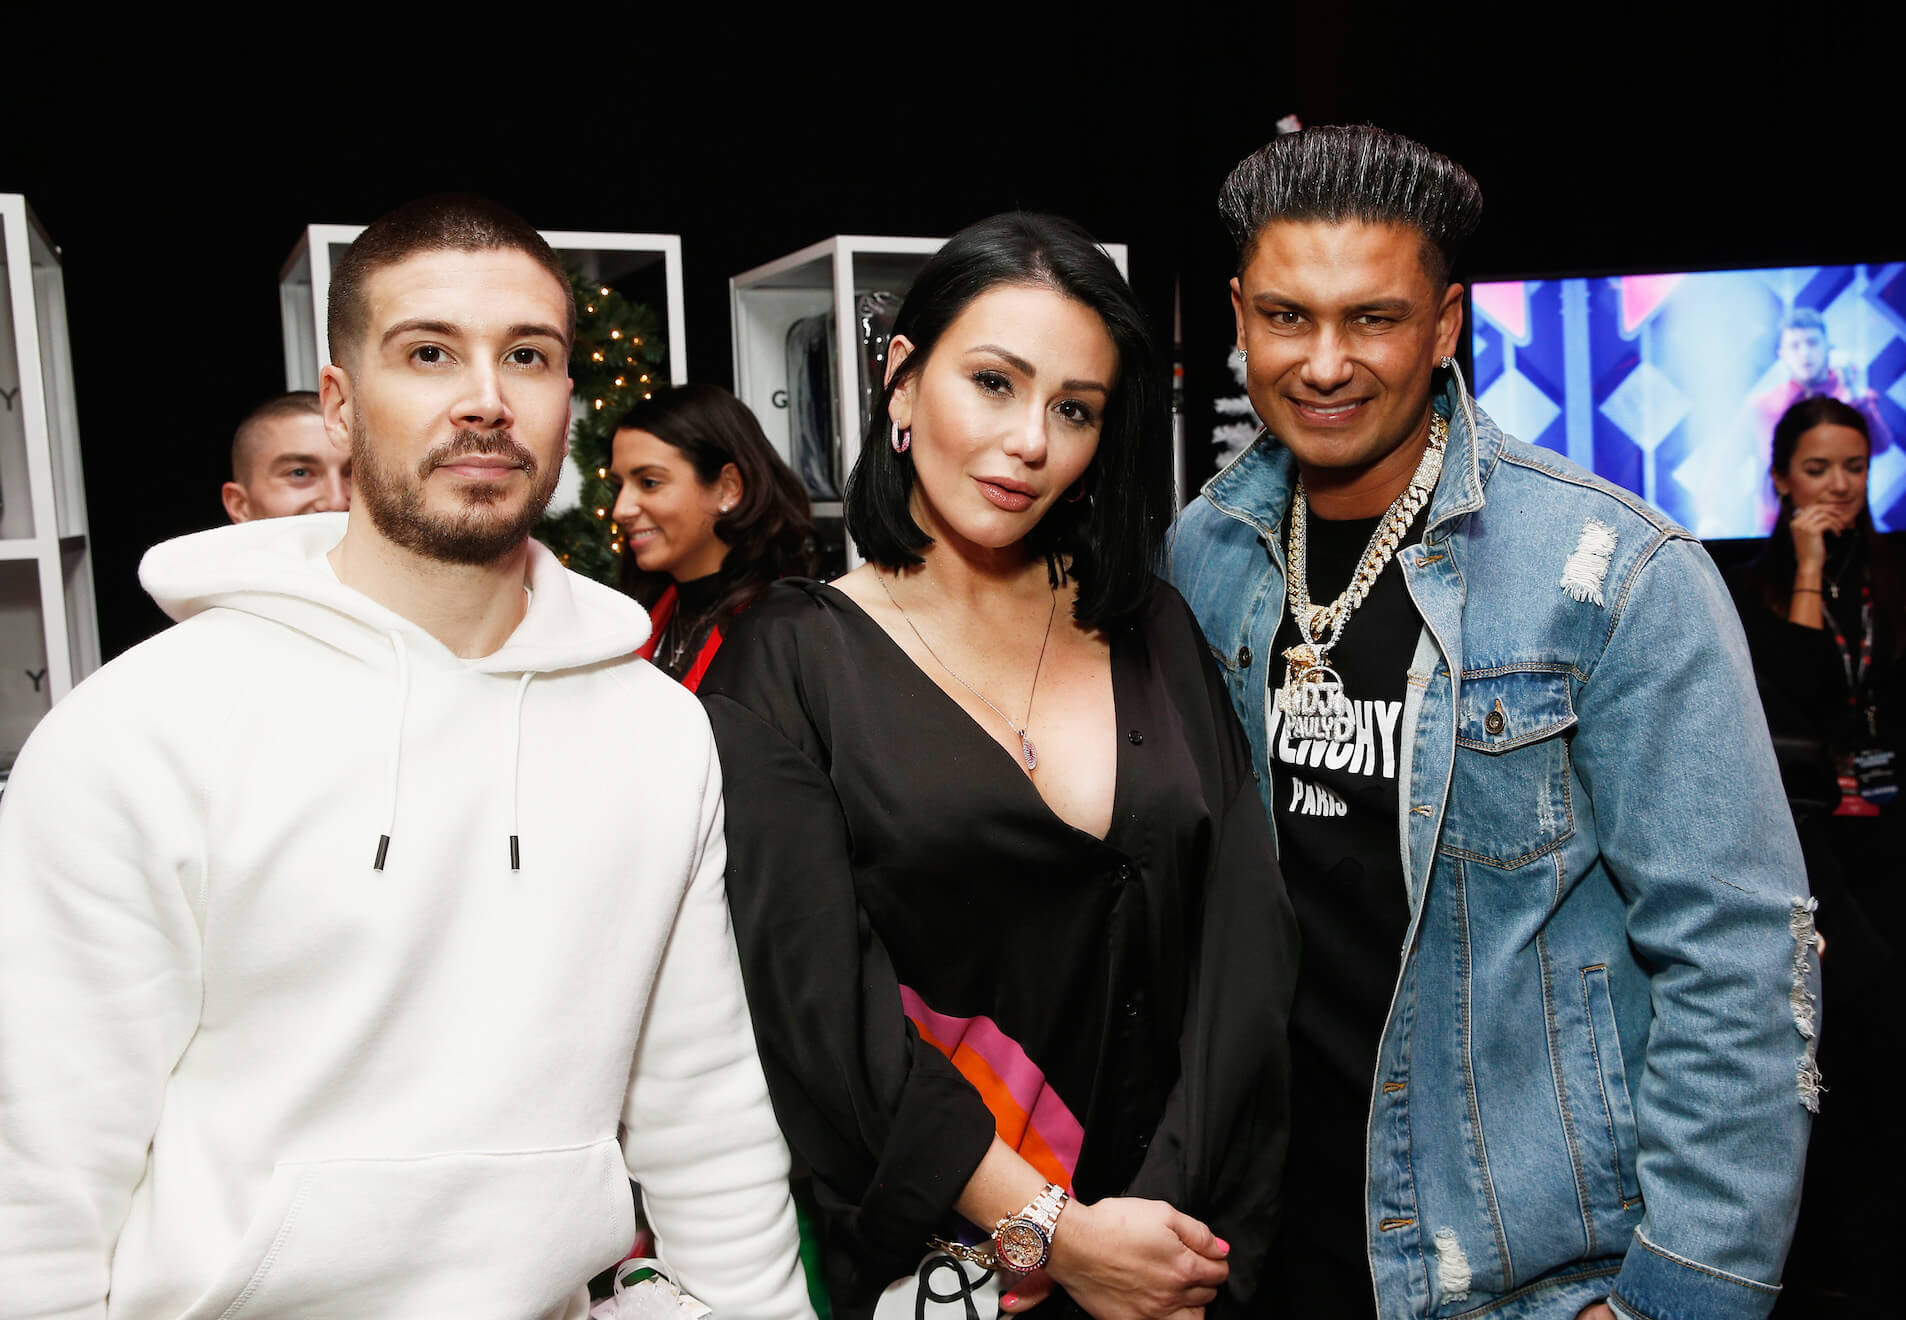 'Jersey Shore' stars Vinny Guadagnino, Jenni 'Jwoww' Farley, and Pauly D standing next to each other at Z100's Jingle Ball 2018